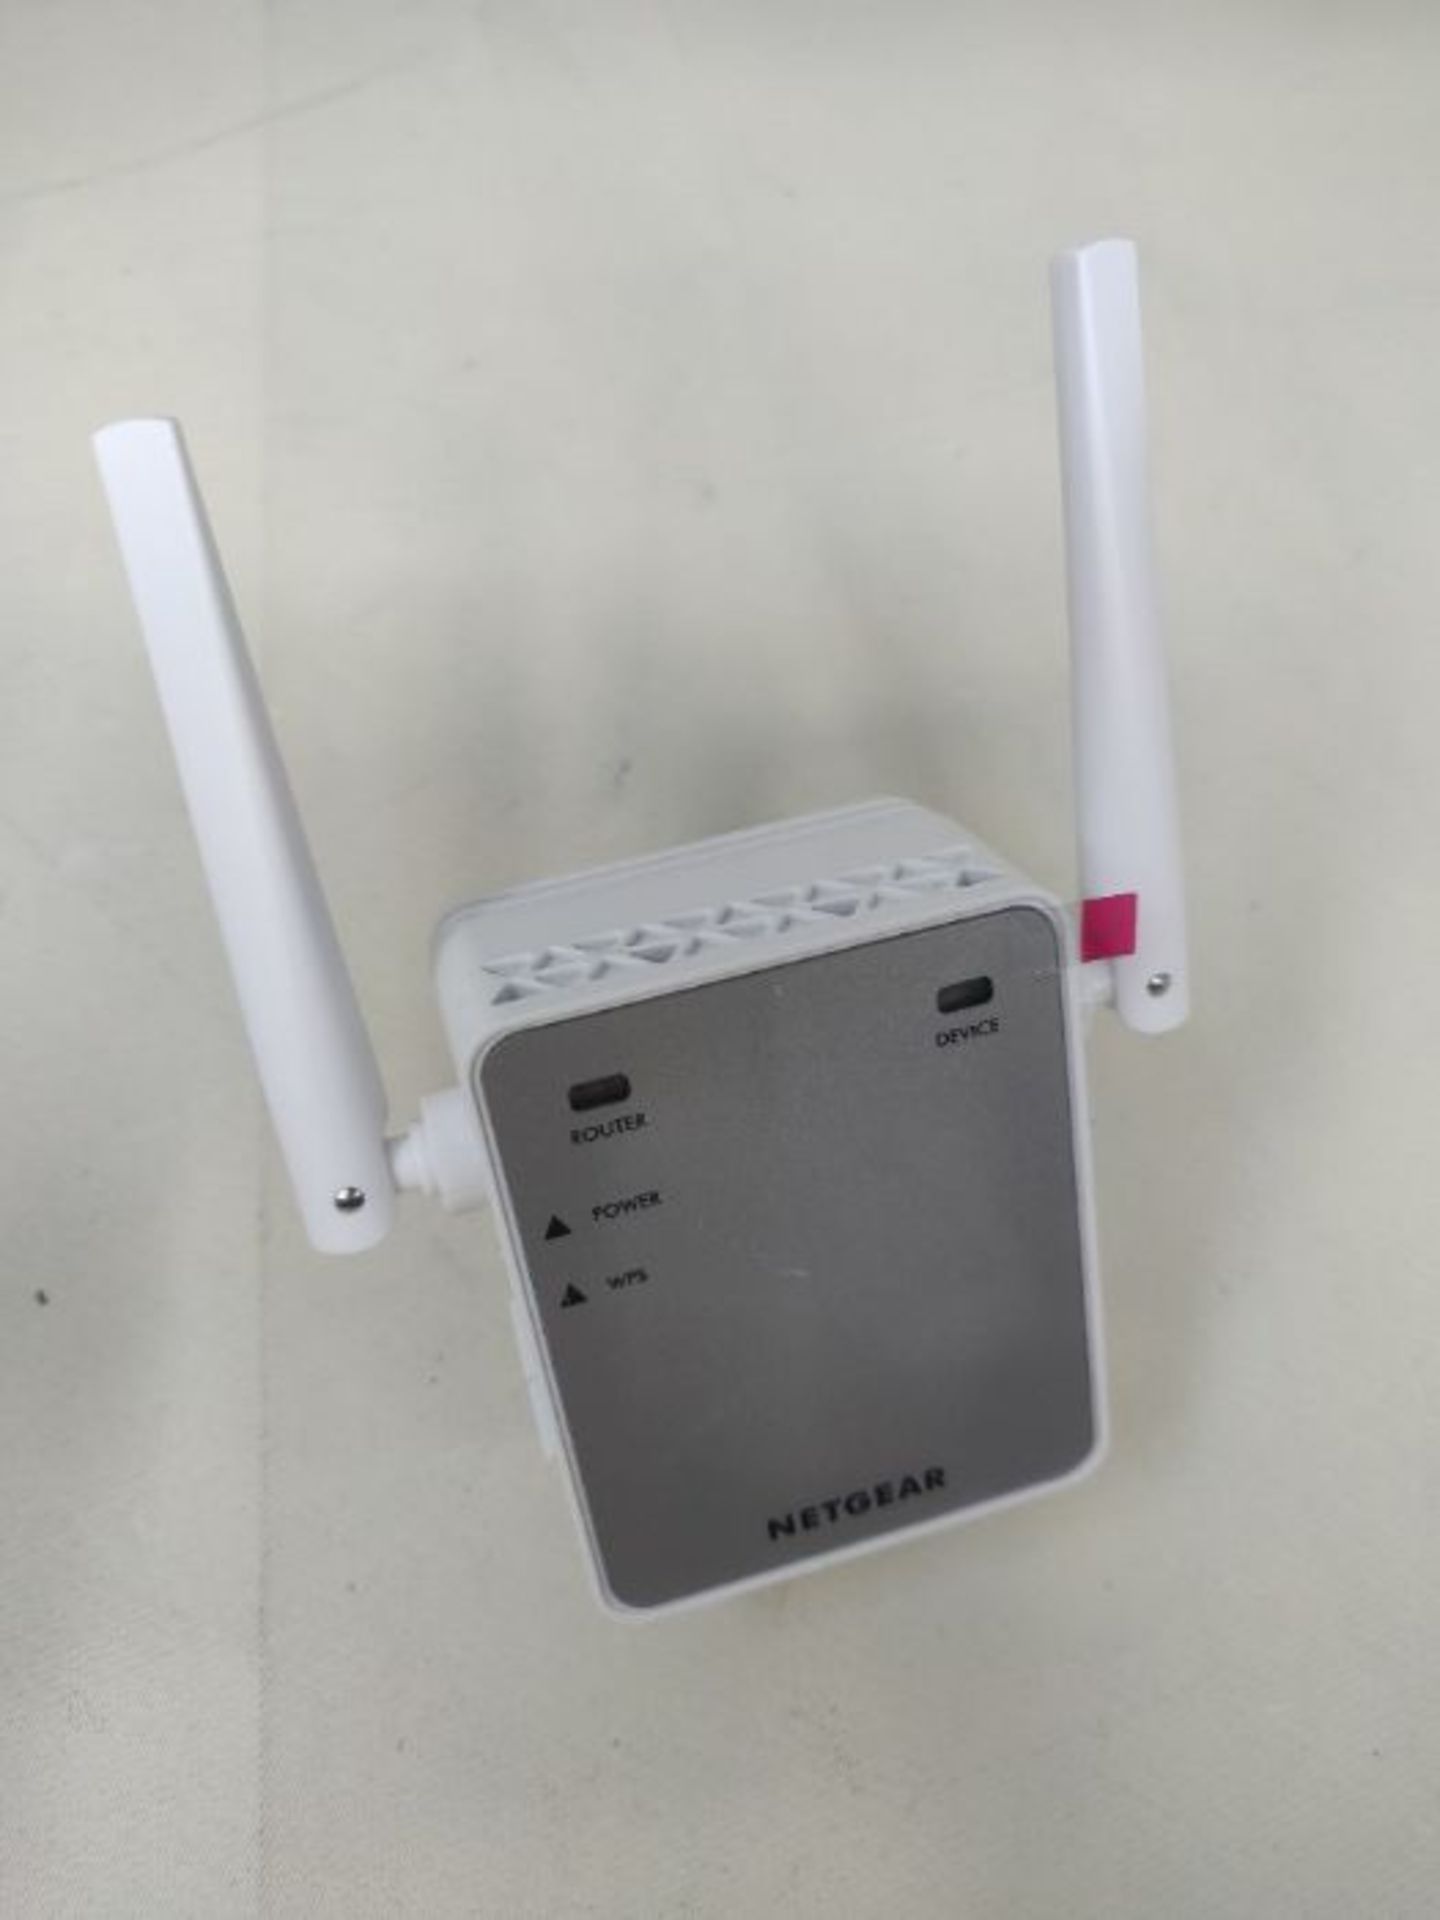 NETGEAR Wi-Fi Range Extender EX2700 - Coverage up to 600 sq.ft. and 10 devices with N3 - Image 3 of 3